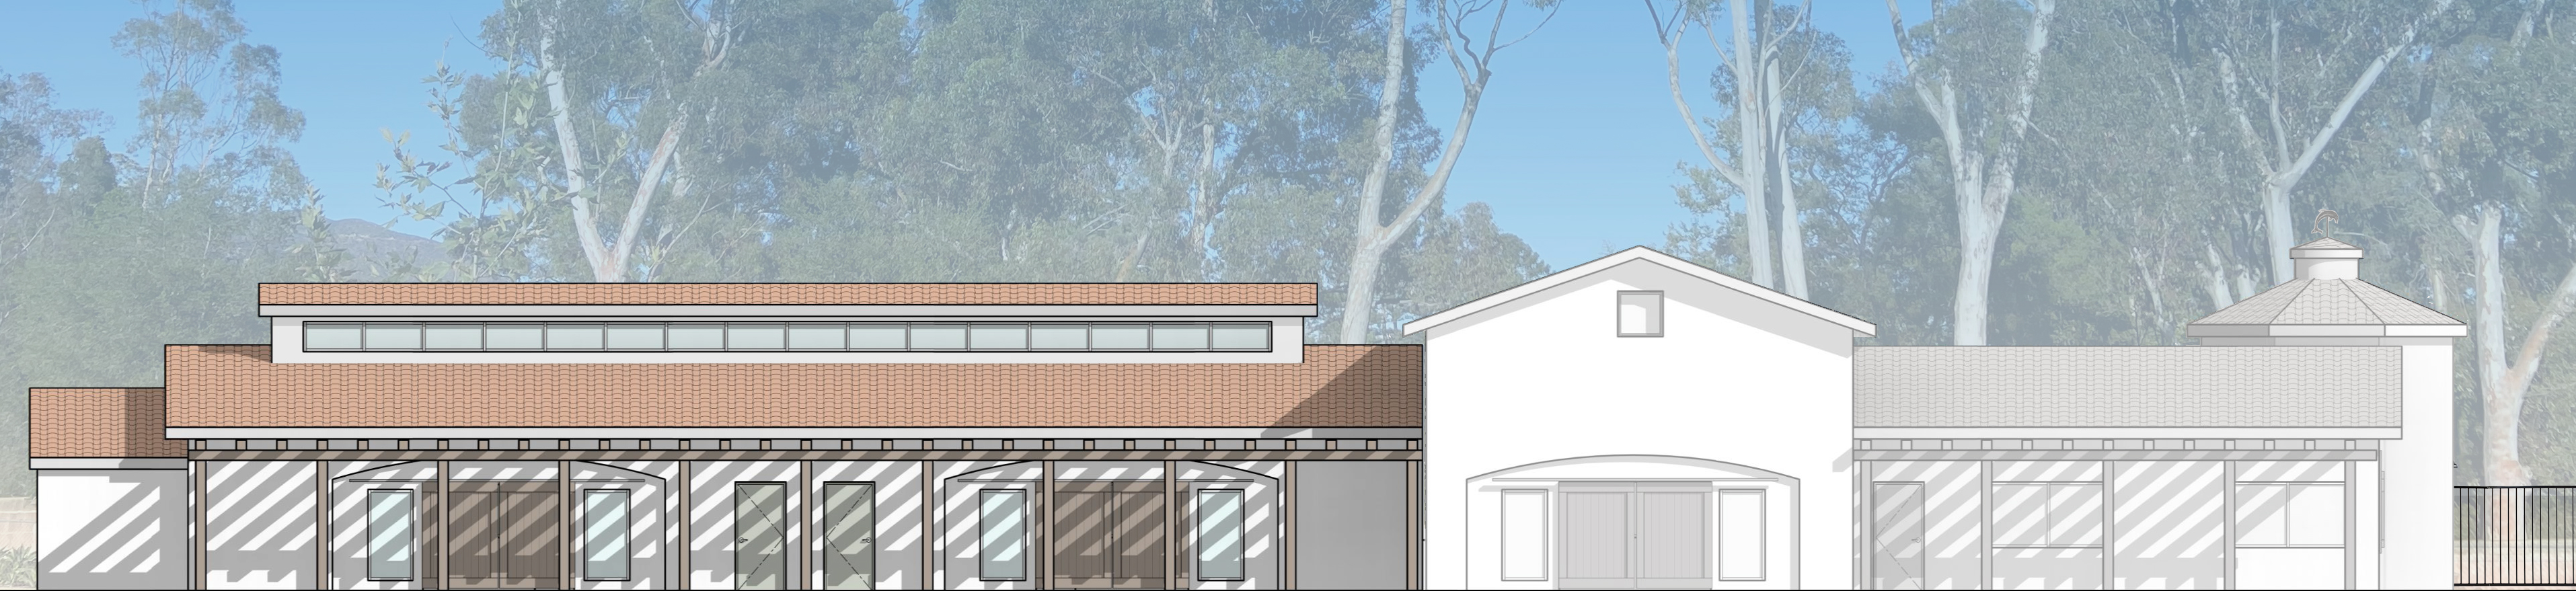 Image of West Elevation of Proposed new building